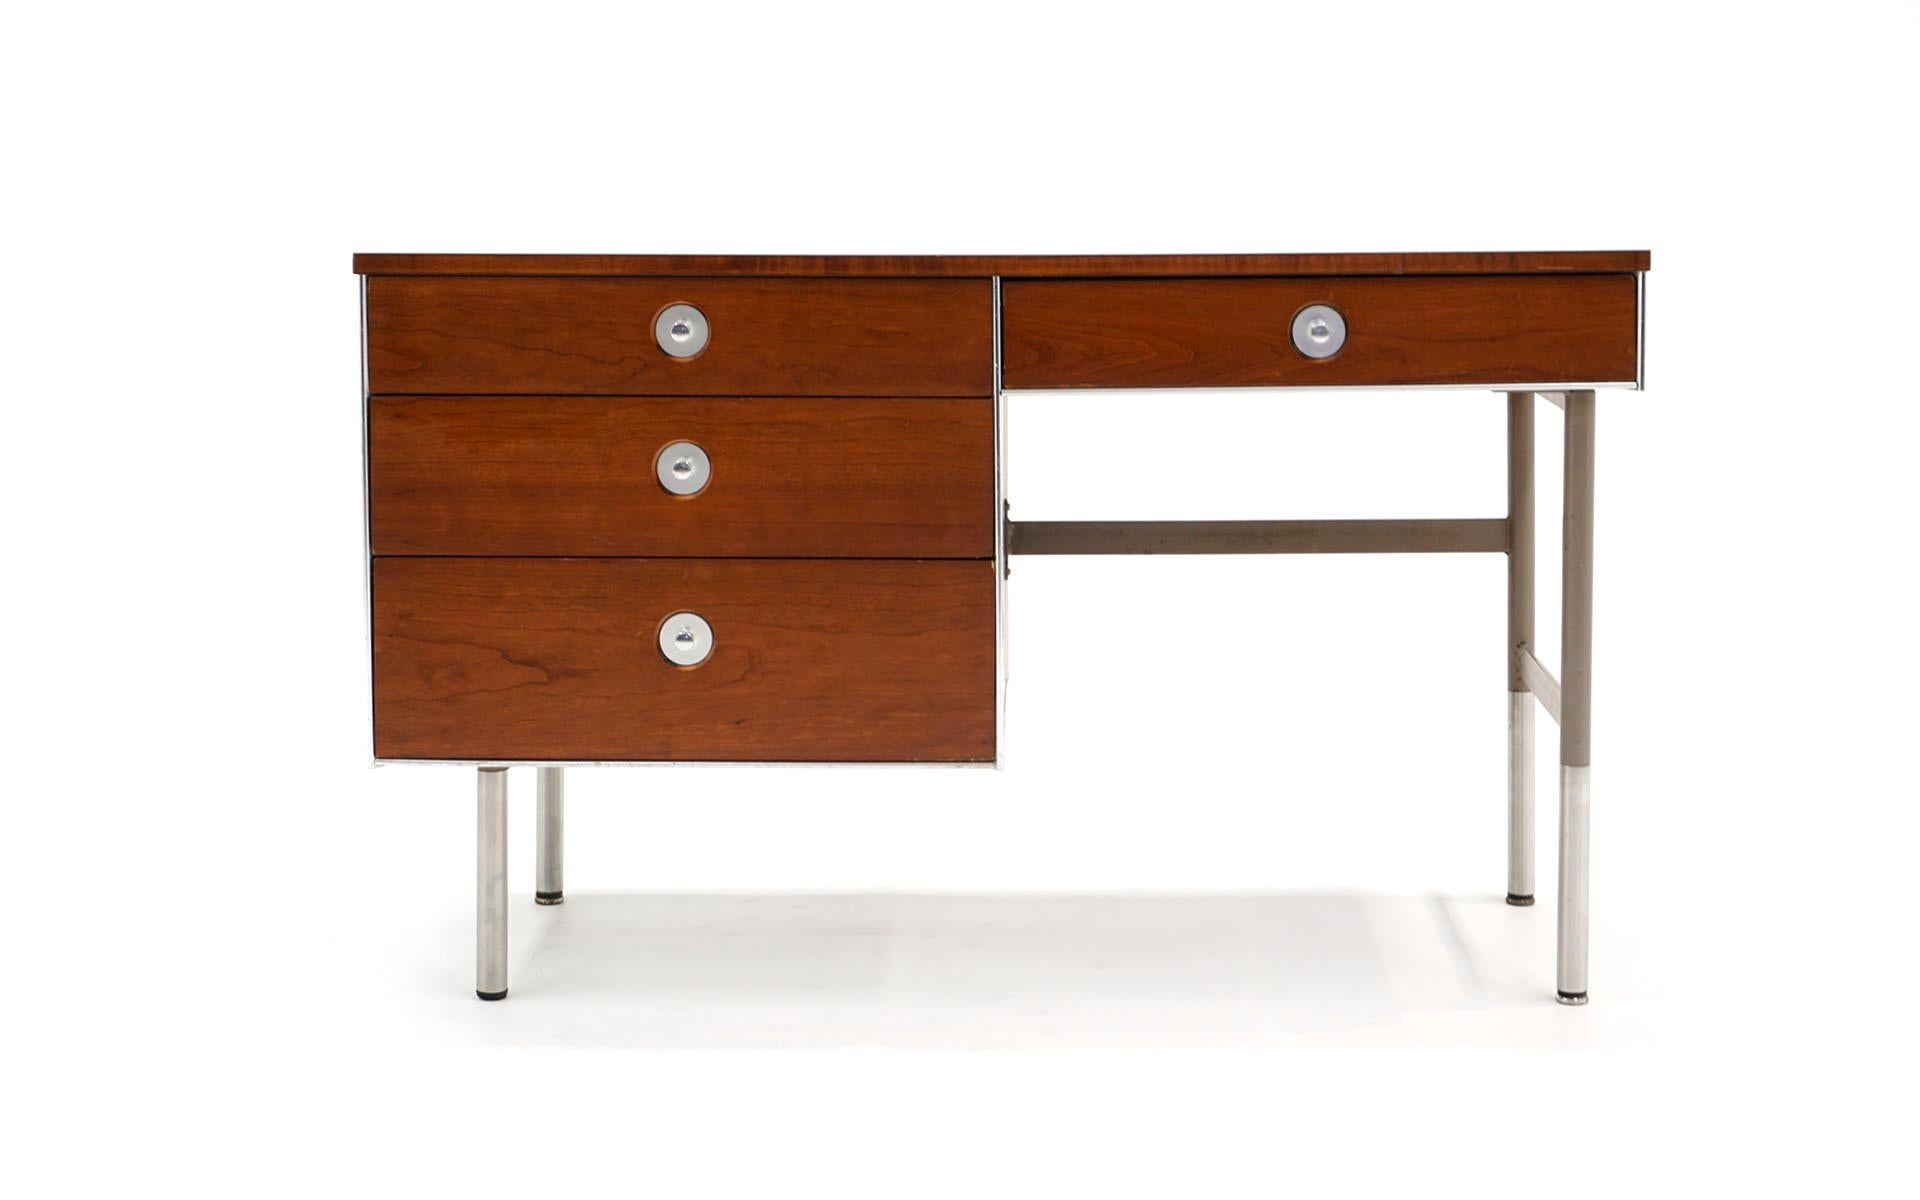 1960a Raymond Loewy for Rom Hill small desk in very good, ready to use all original condition. Walnut case with steel frame and aluminum trim and pulls. Single pedestal with three drawers and single drawer above the knee opening. Original laminate